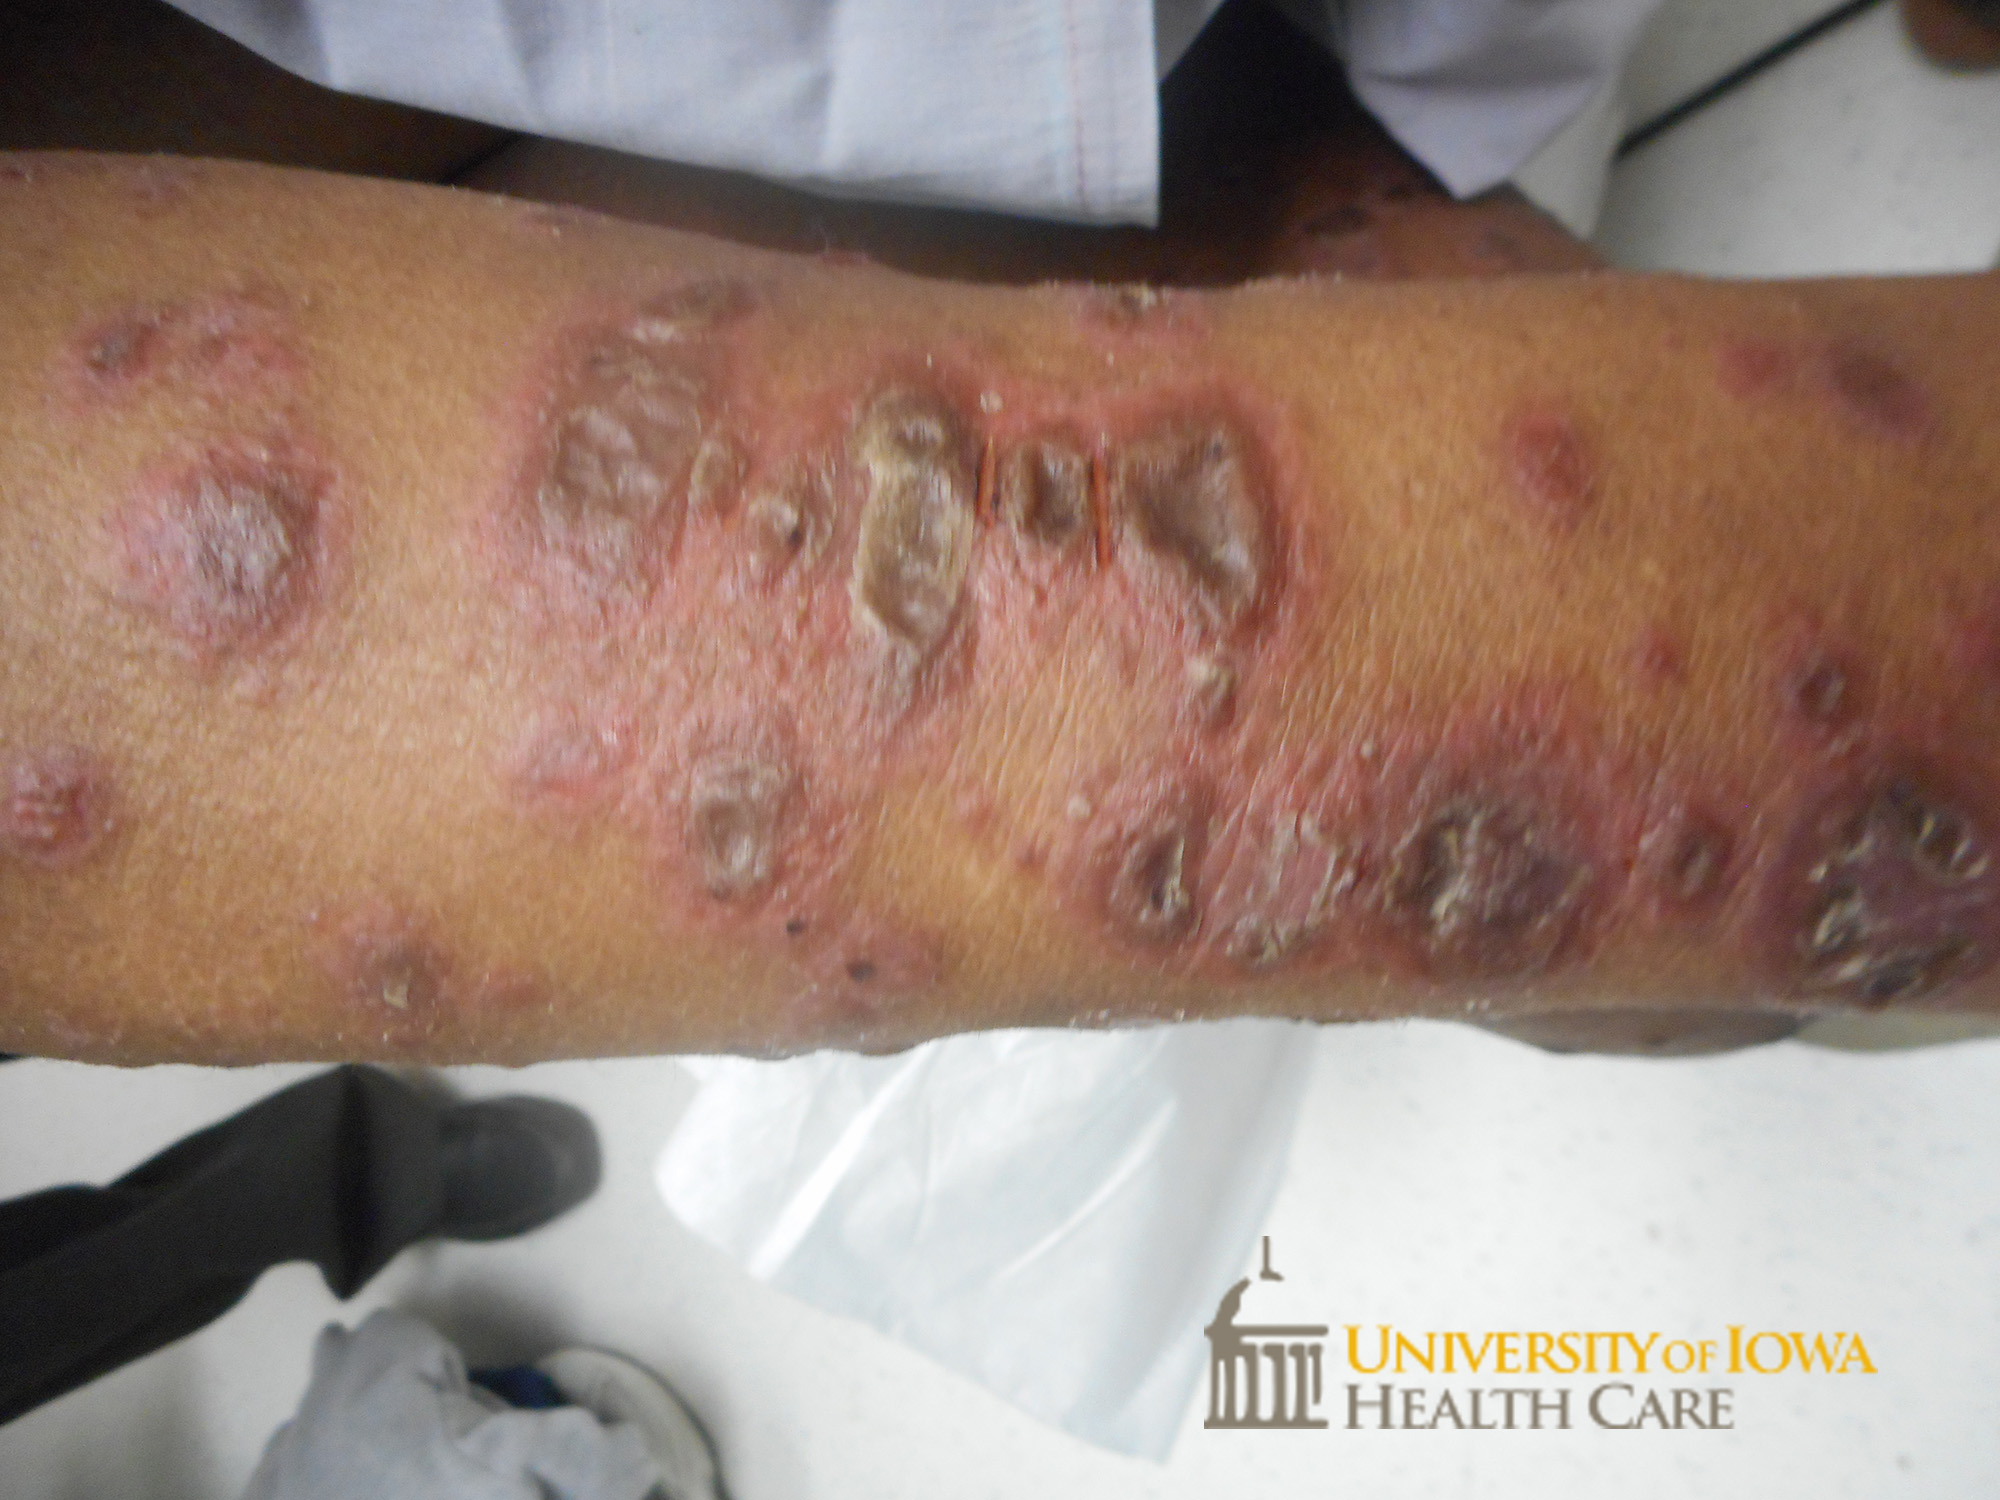 Pink papules and plaques, some with overlying brown scale, on the extremity. (click images for higher resolution).